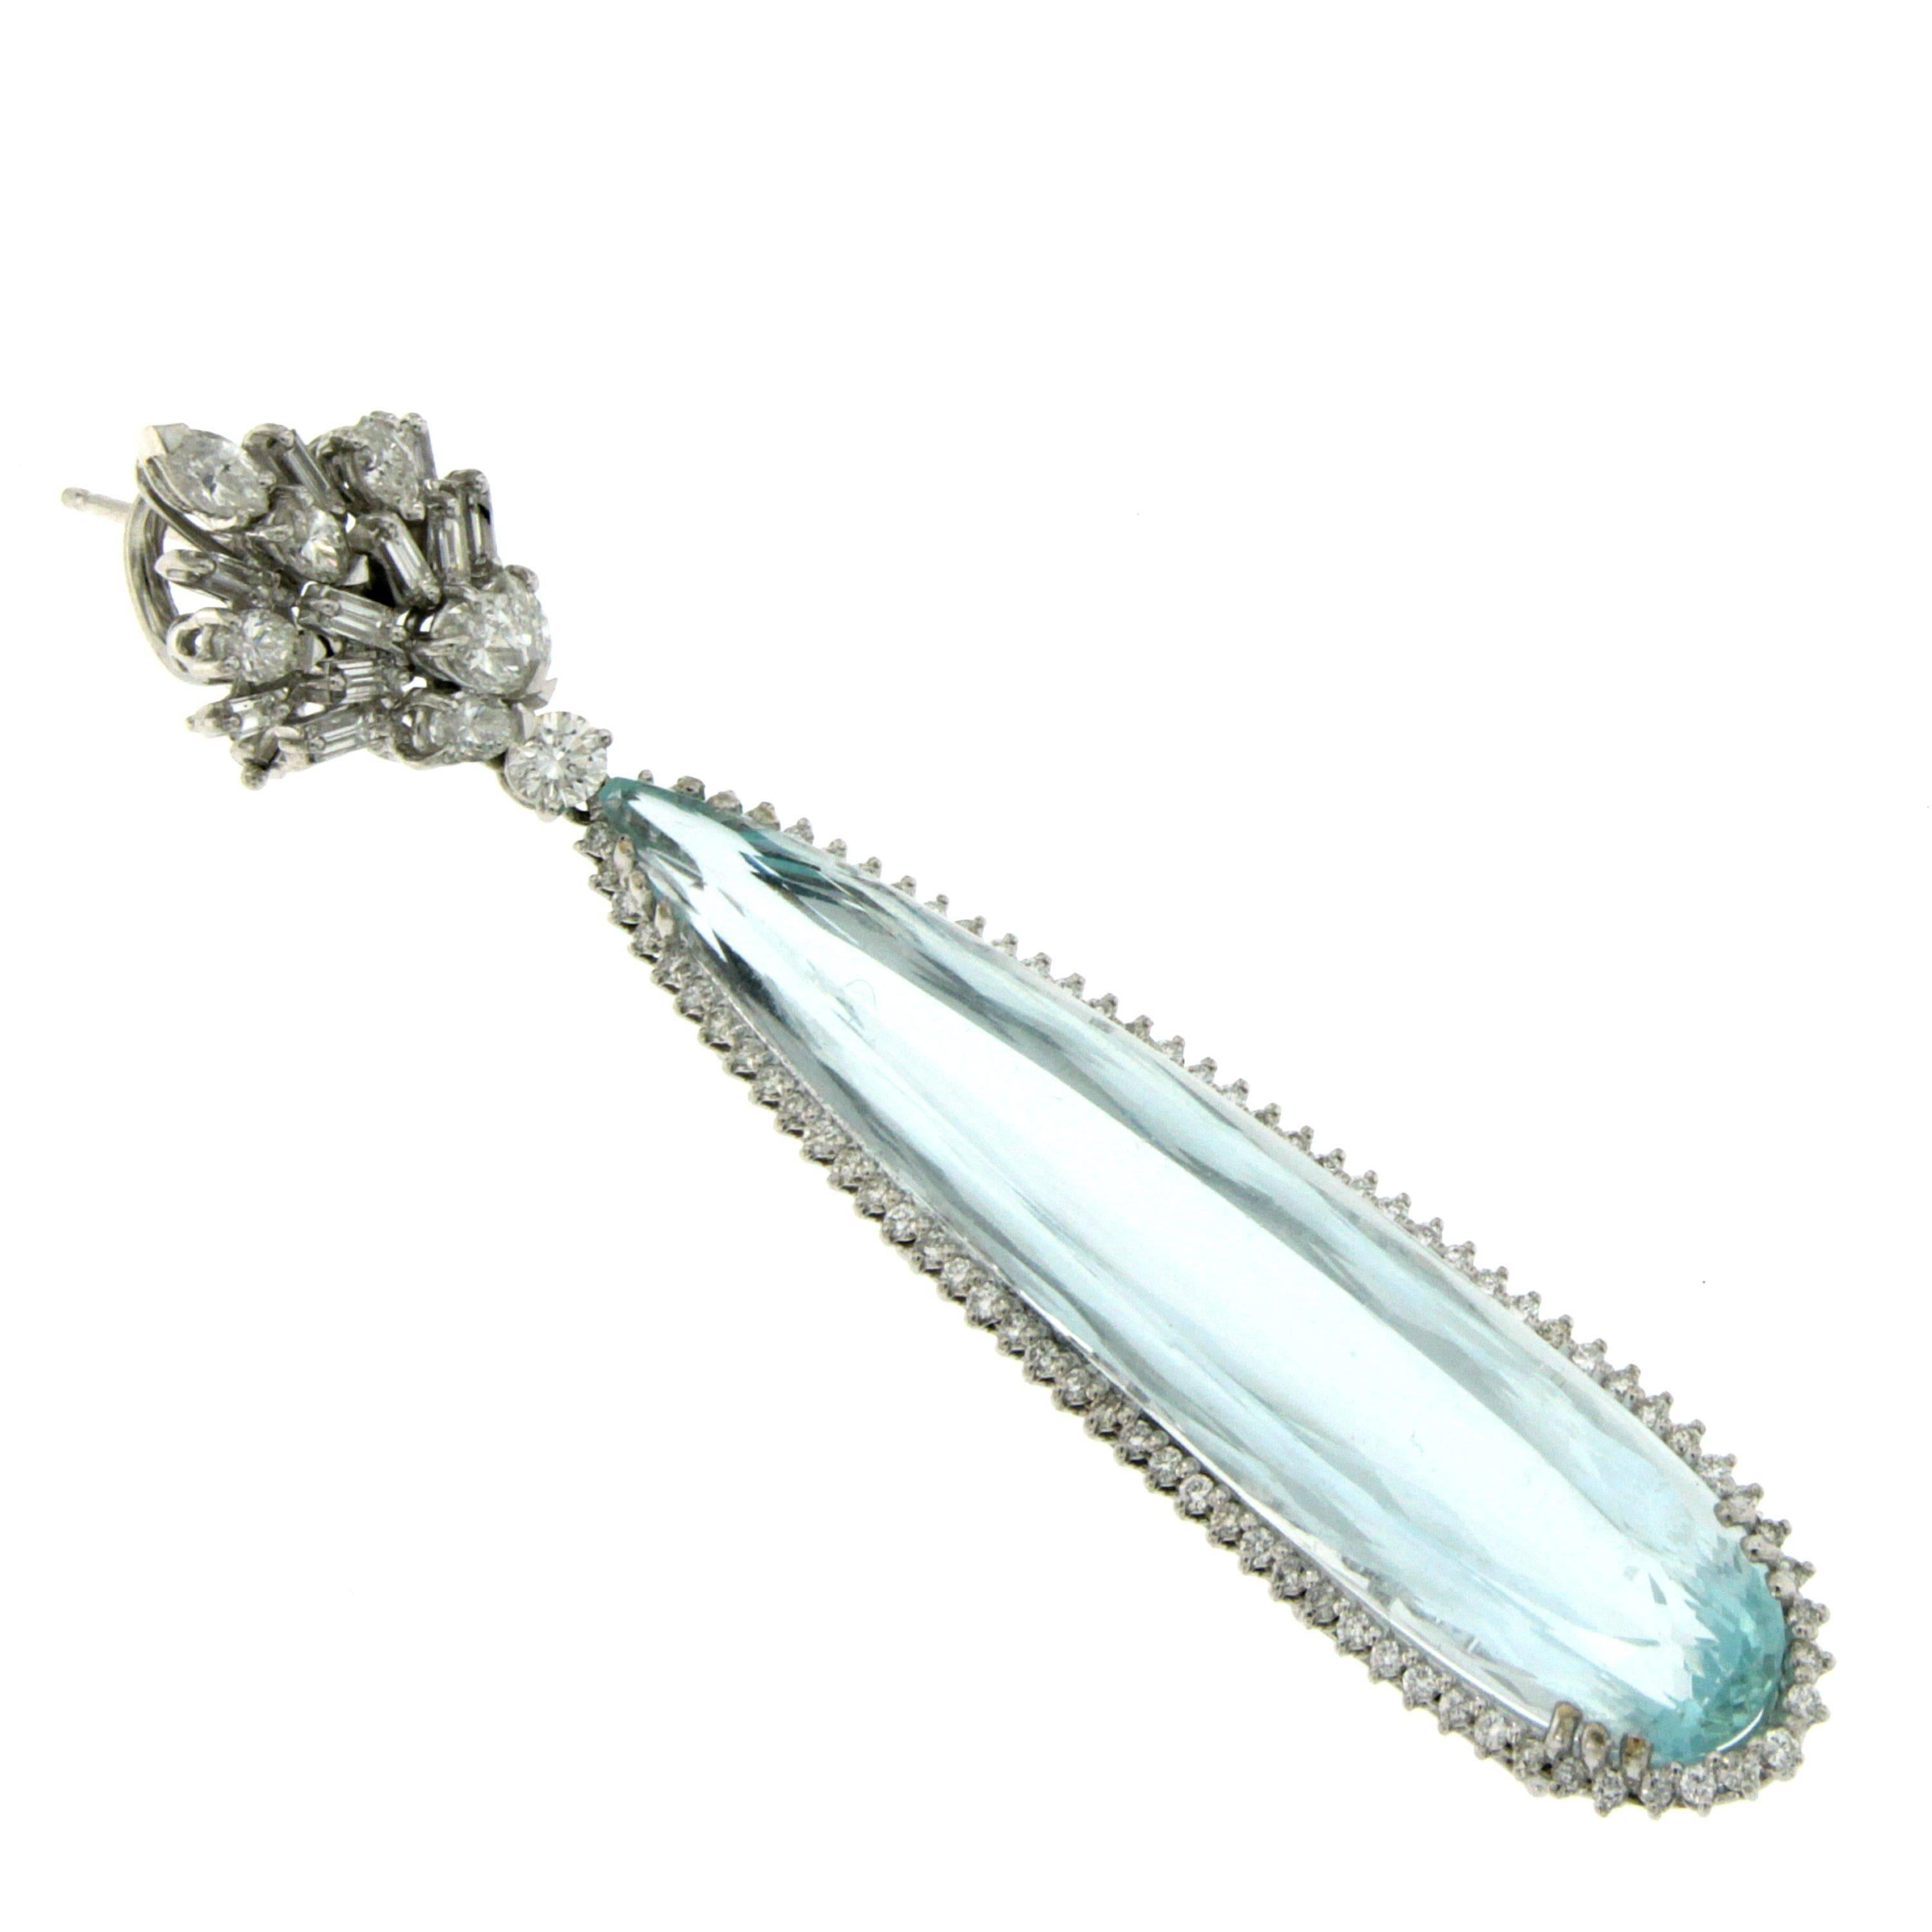 Substantial in size and spectacular in appearance, this stunning pair of earrings is set in 18k White Gold and features two beautiful and rare long pear shaped Natural Aquamarine weighing a total of approximately 60 cts surrounded by micro set white